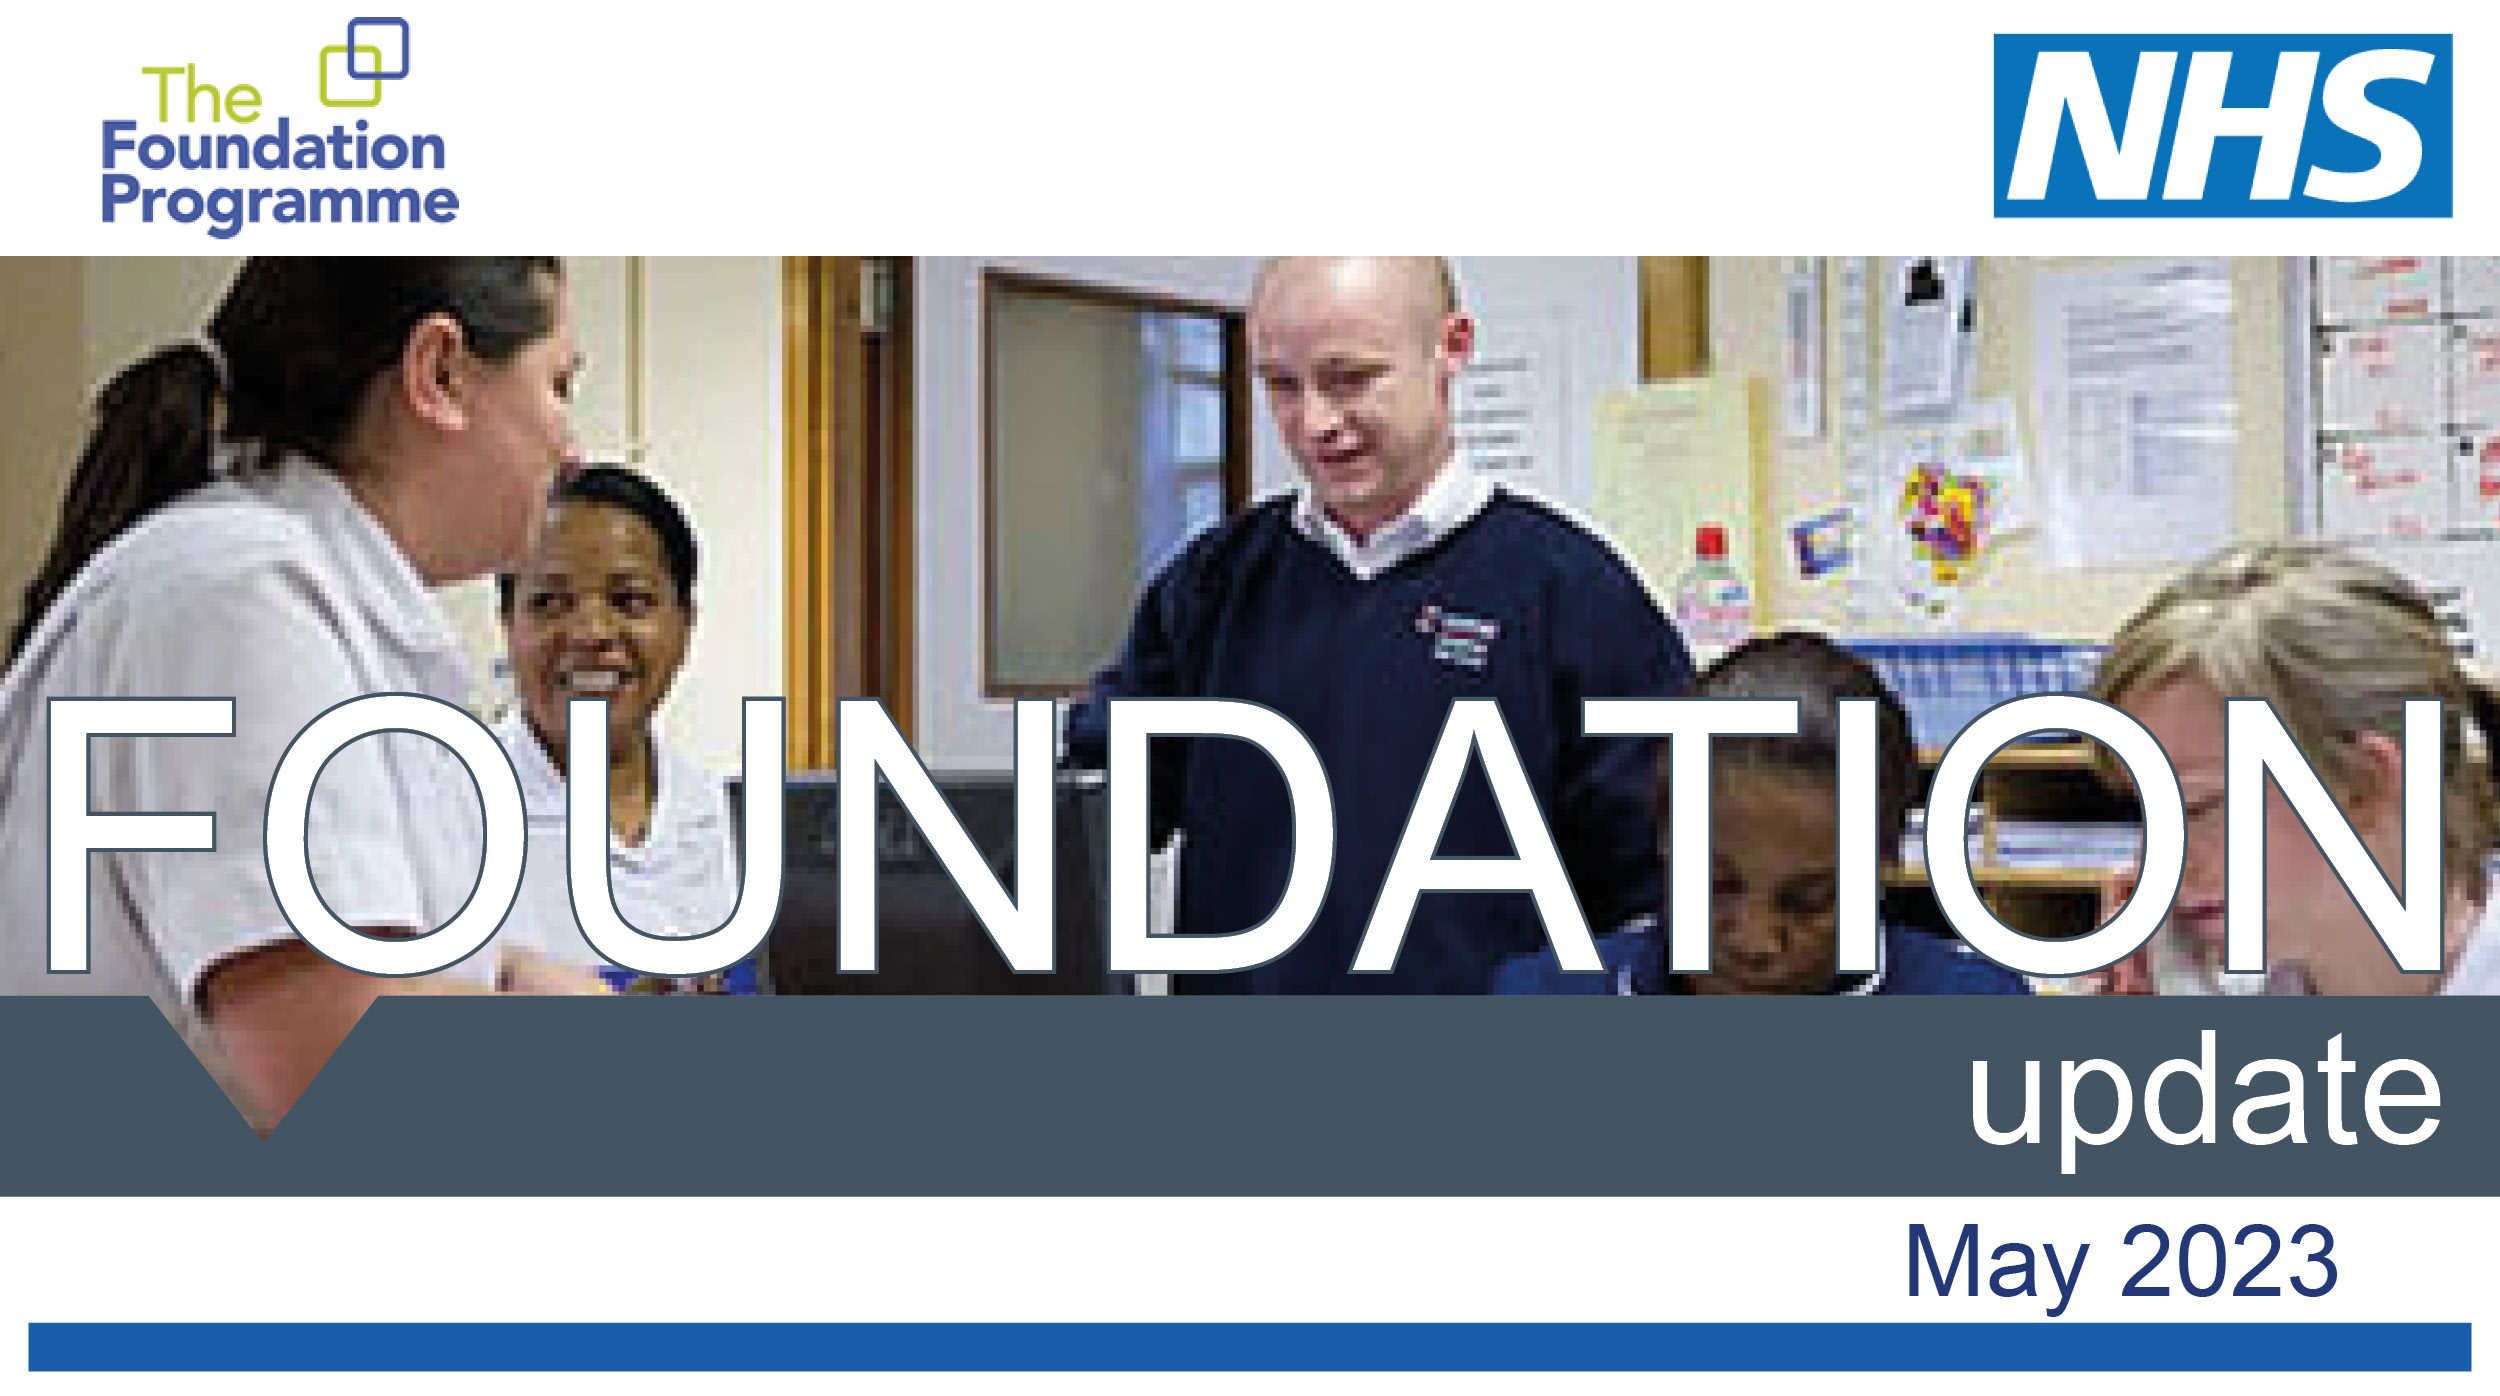 Foundation Update - May 2023, including a photo showing a team of healthcare professionals working together.